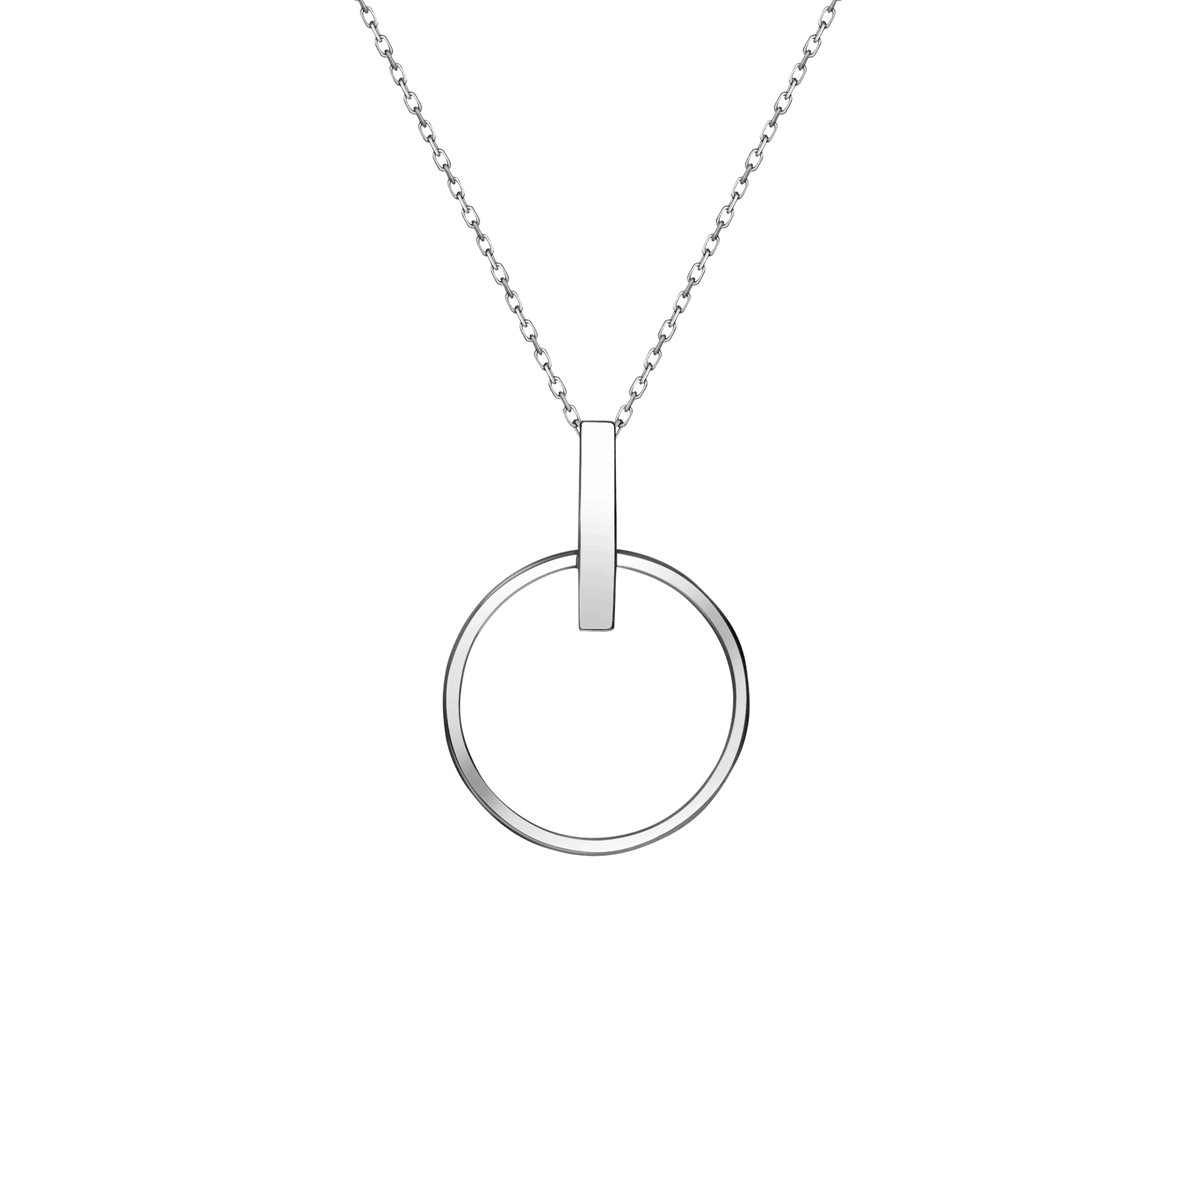 Tiffany Edge Circle Pendant in Platinum and Yellow Gold with Diamonds,  Small | Tiffany & Co. Singapore